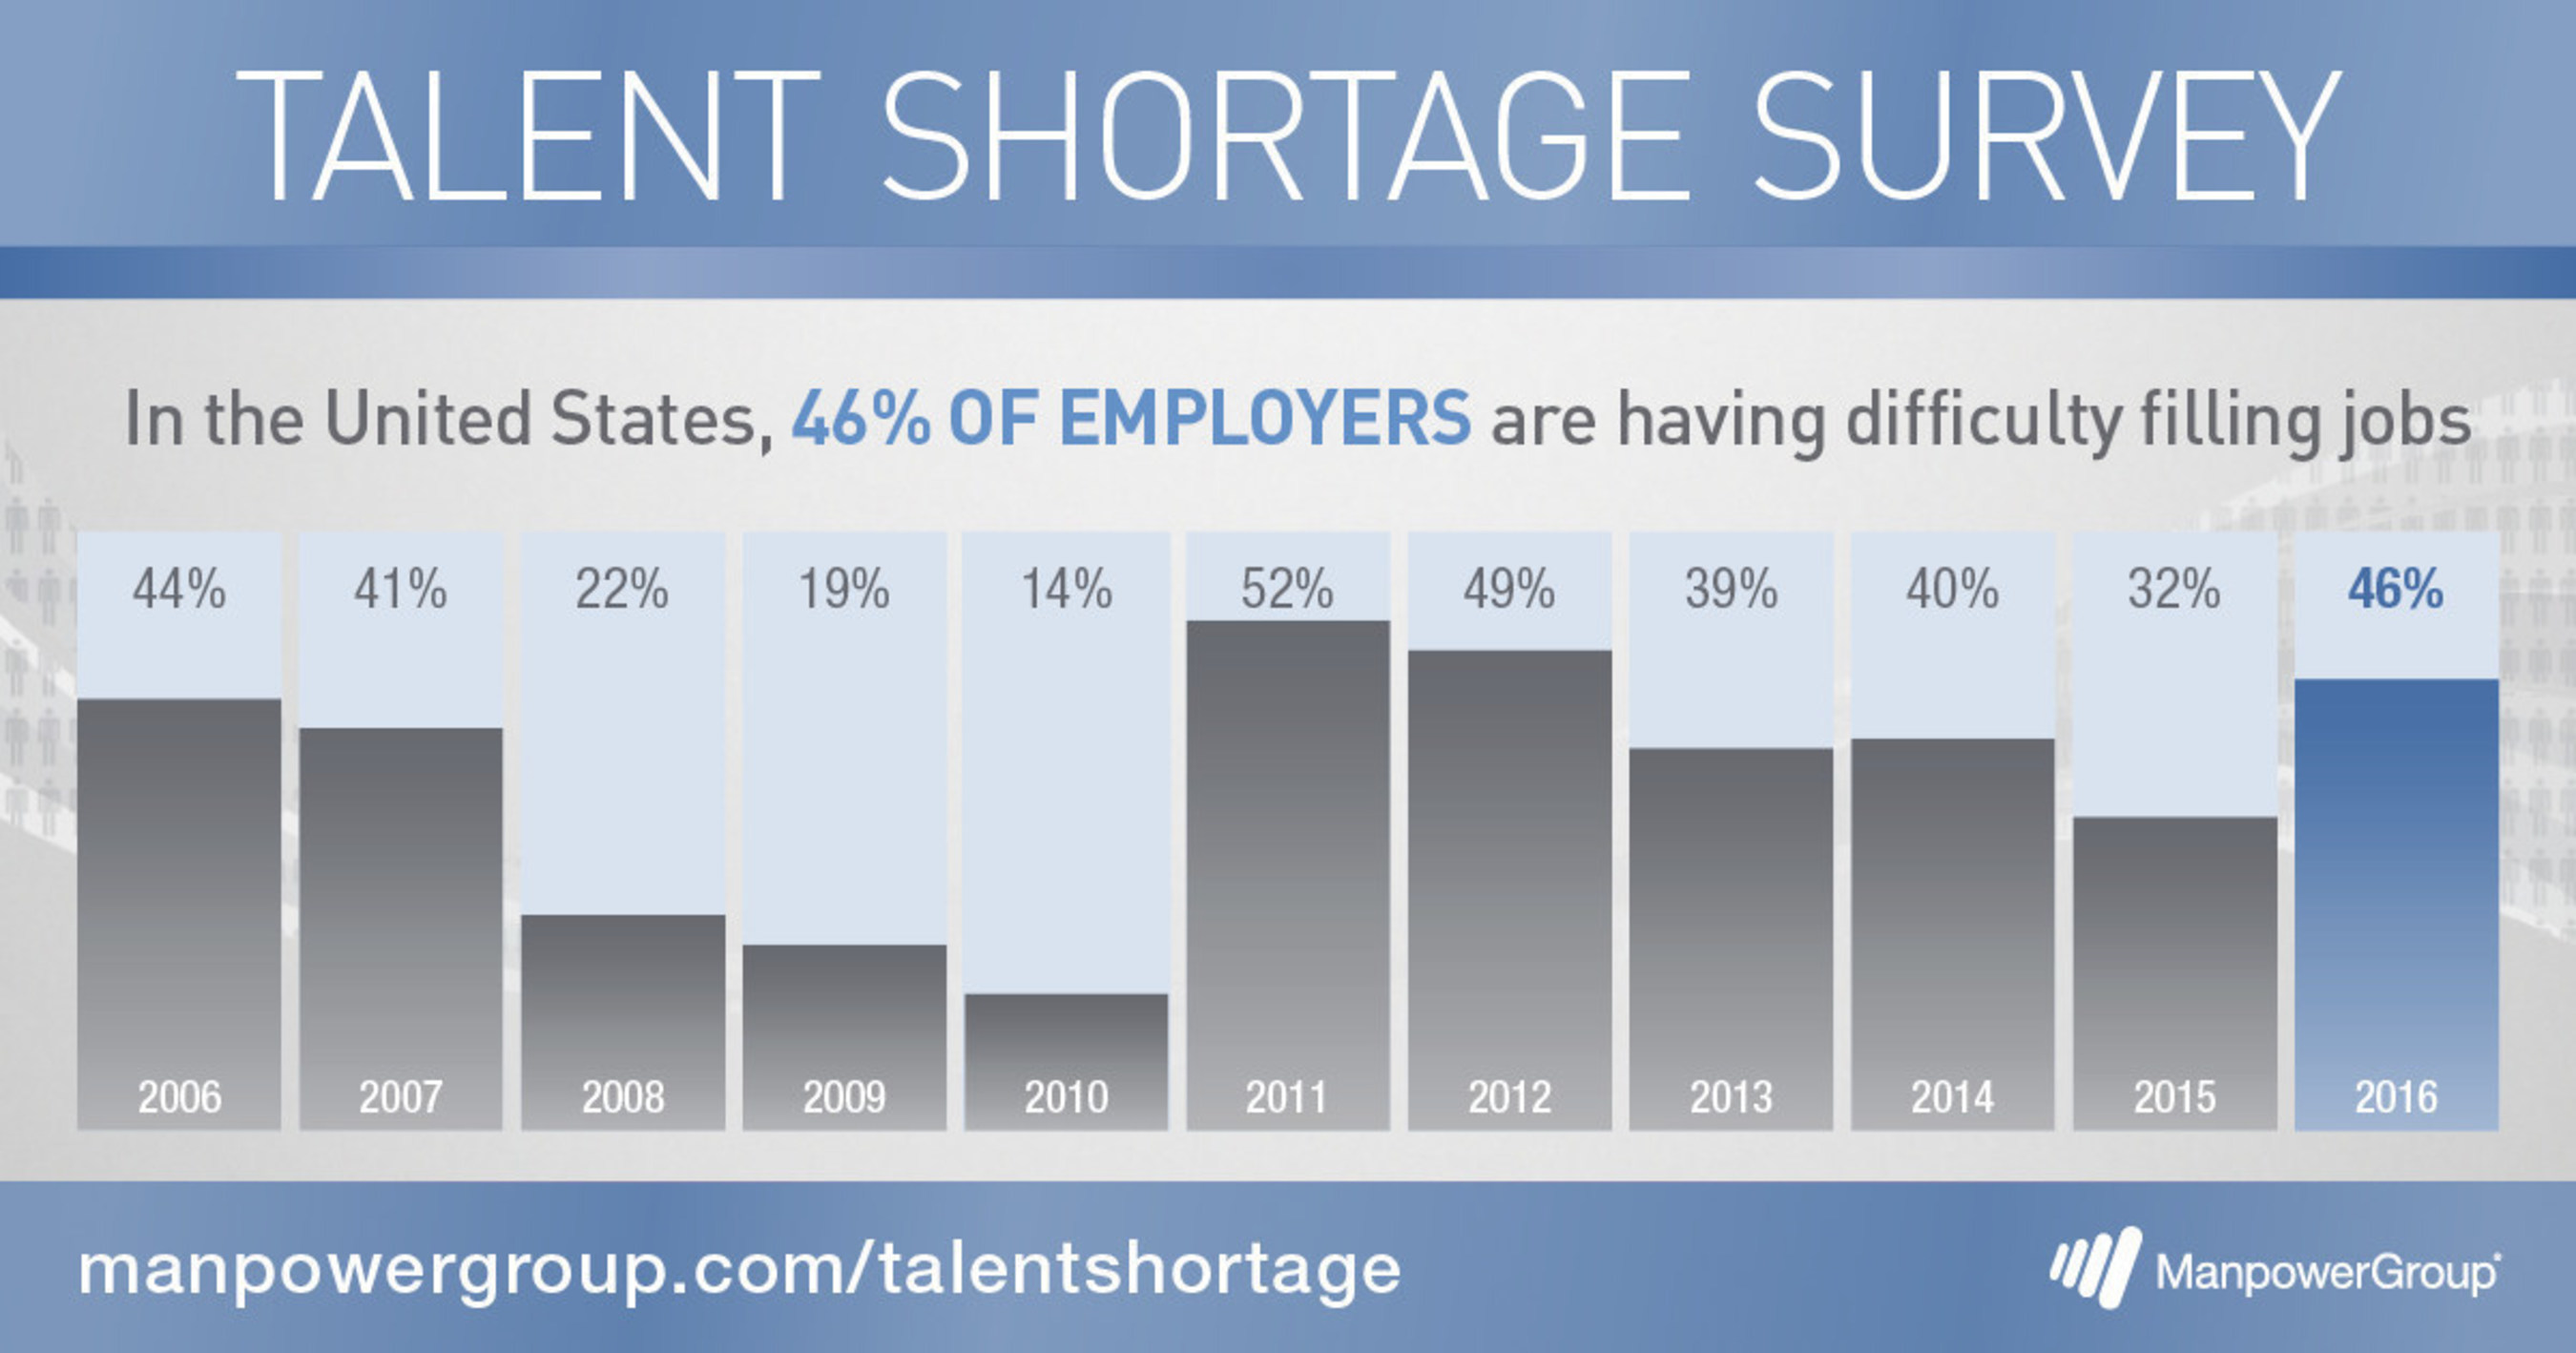 In the United States, 46% of employers are having difficulty filling jobs.